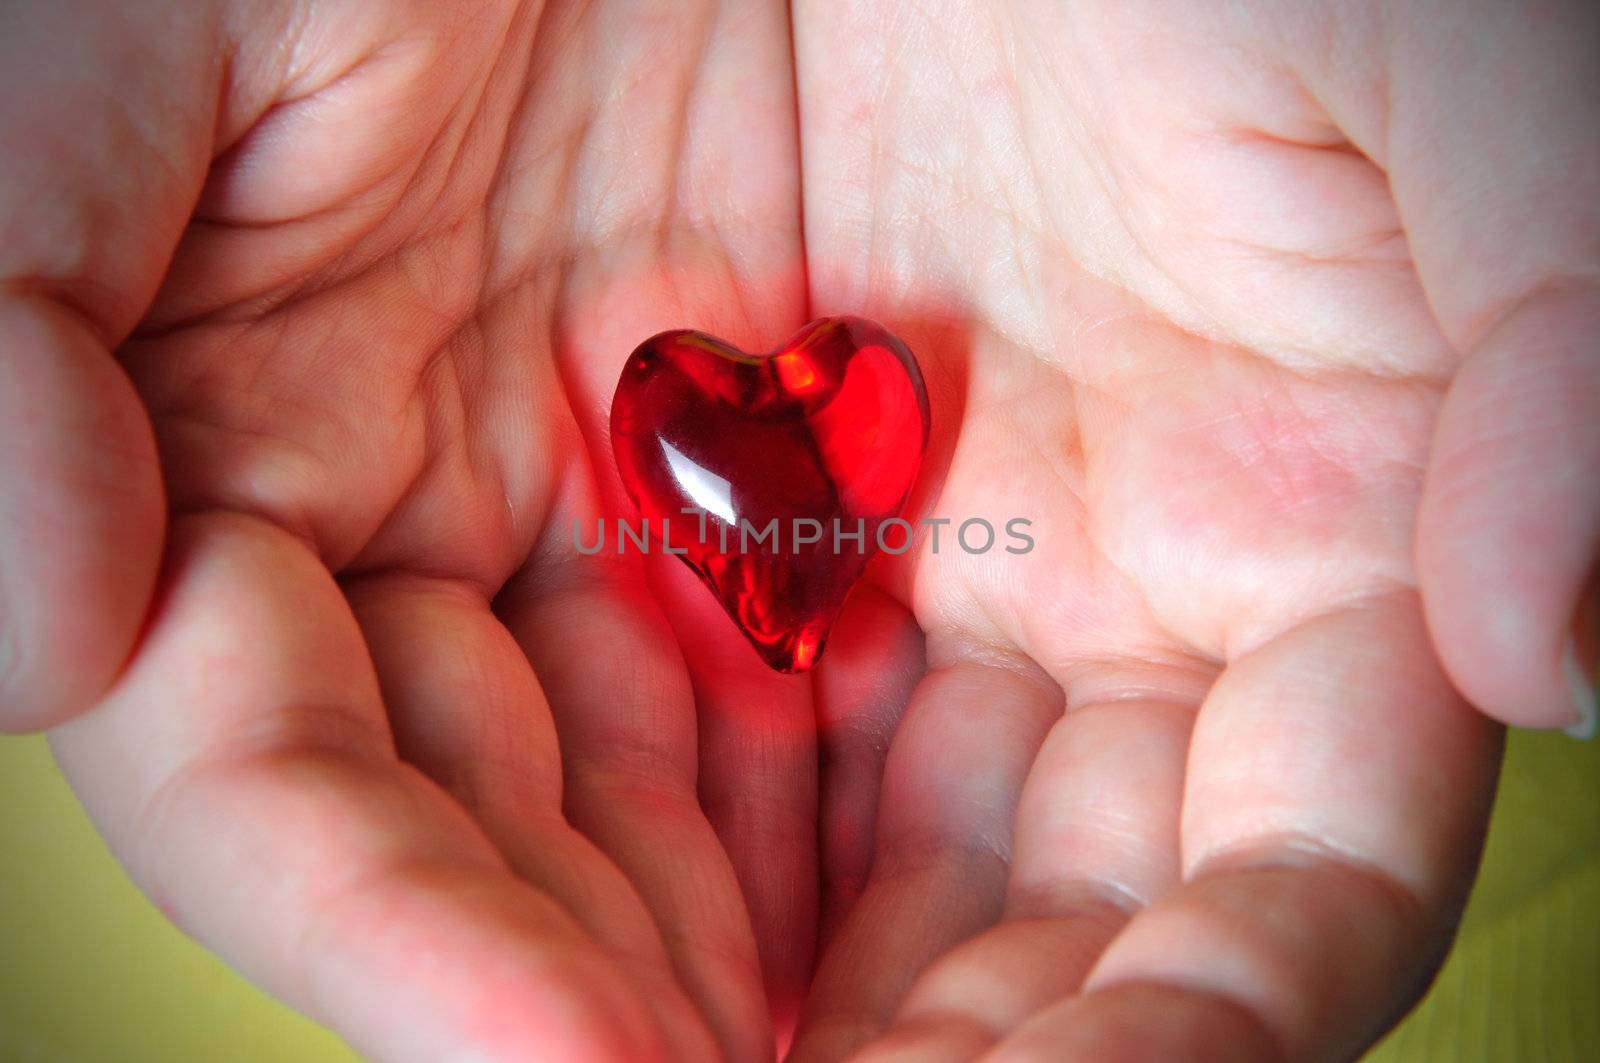 Glowing red heart hold on the palm of one's hands